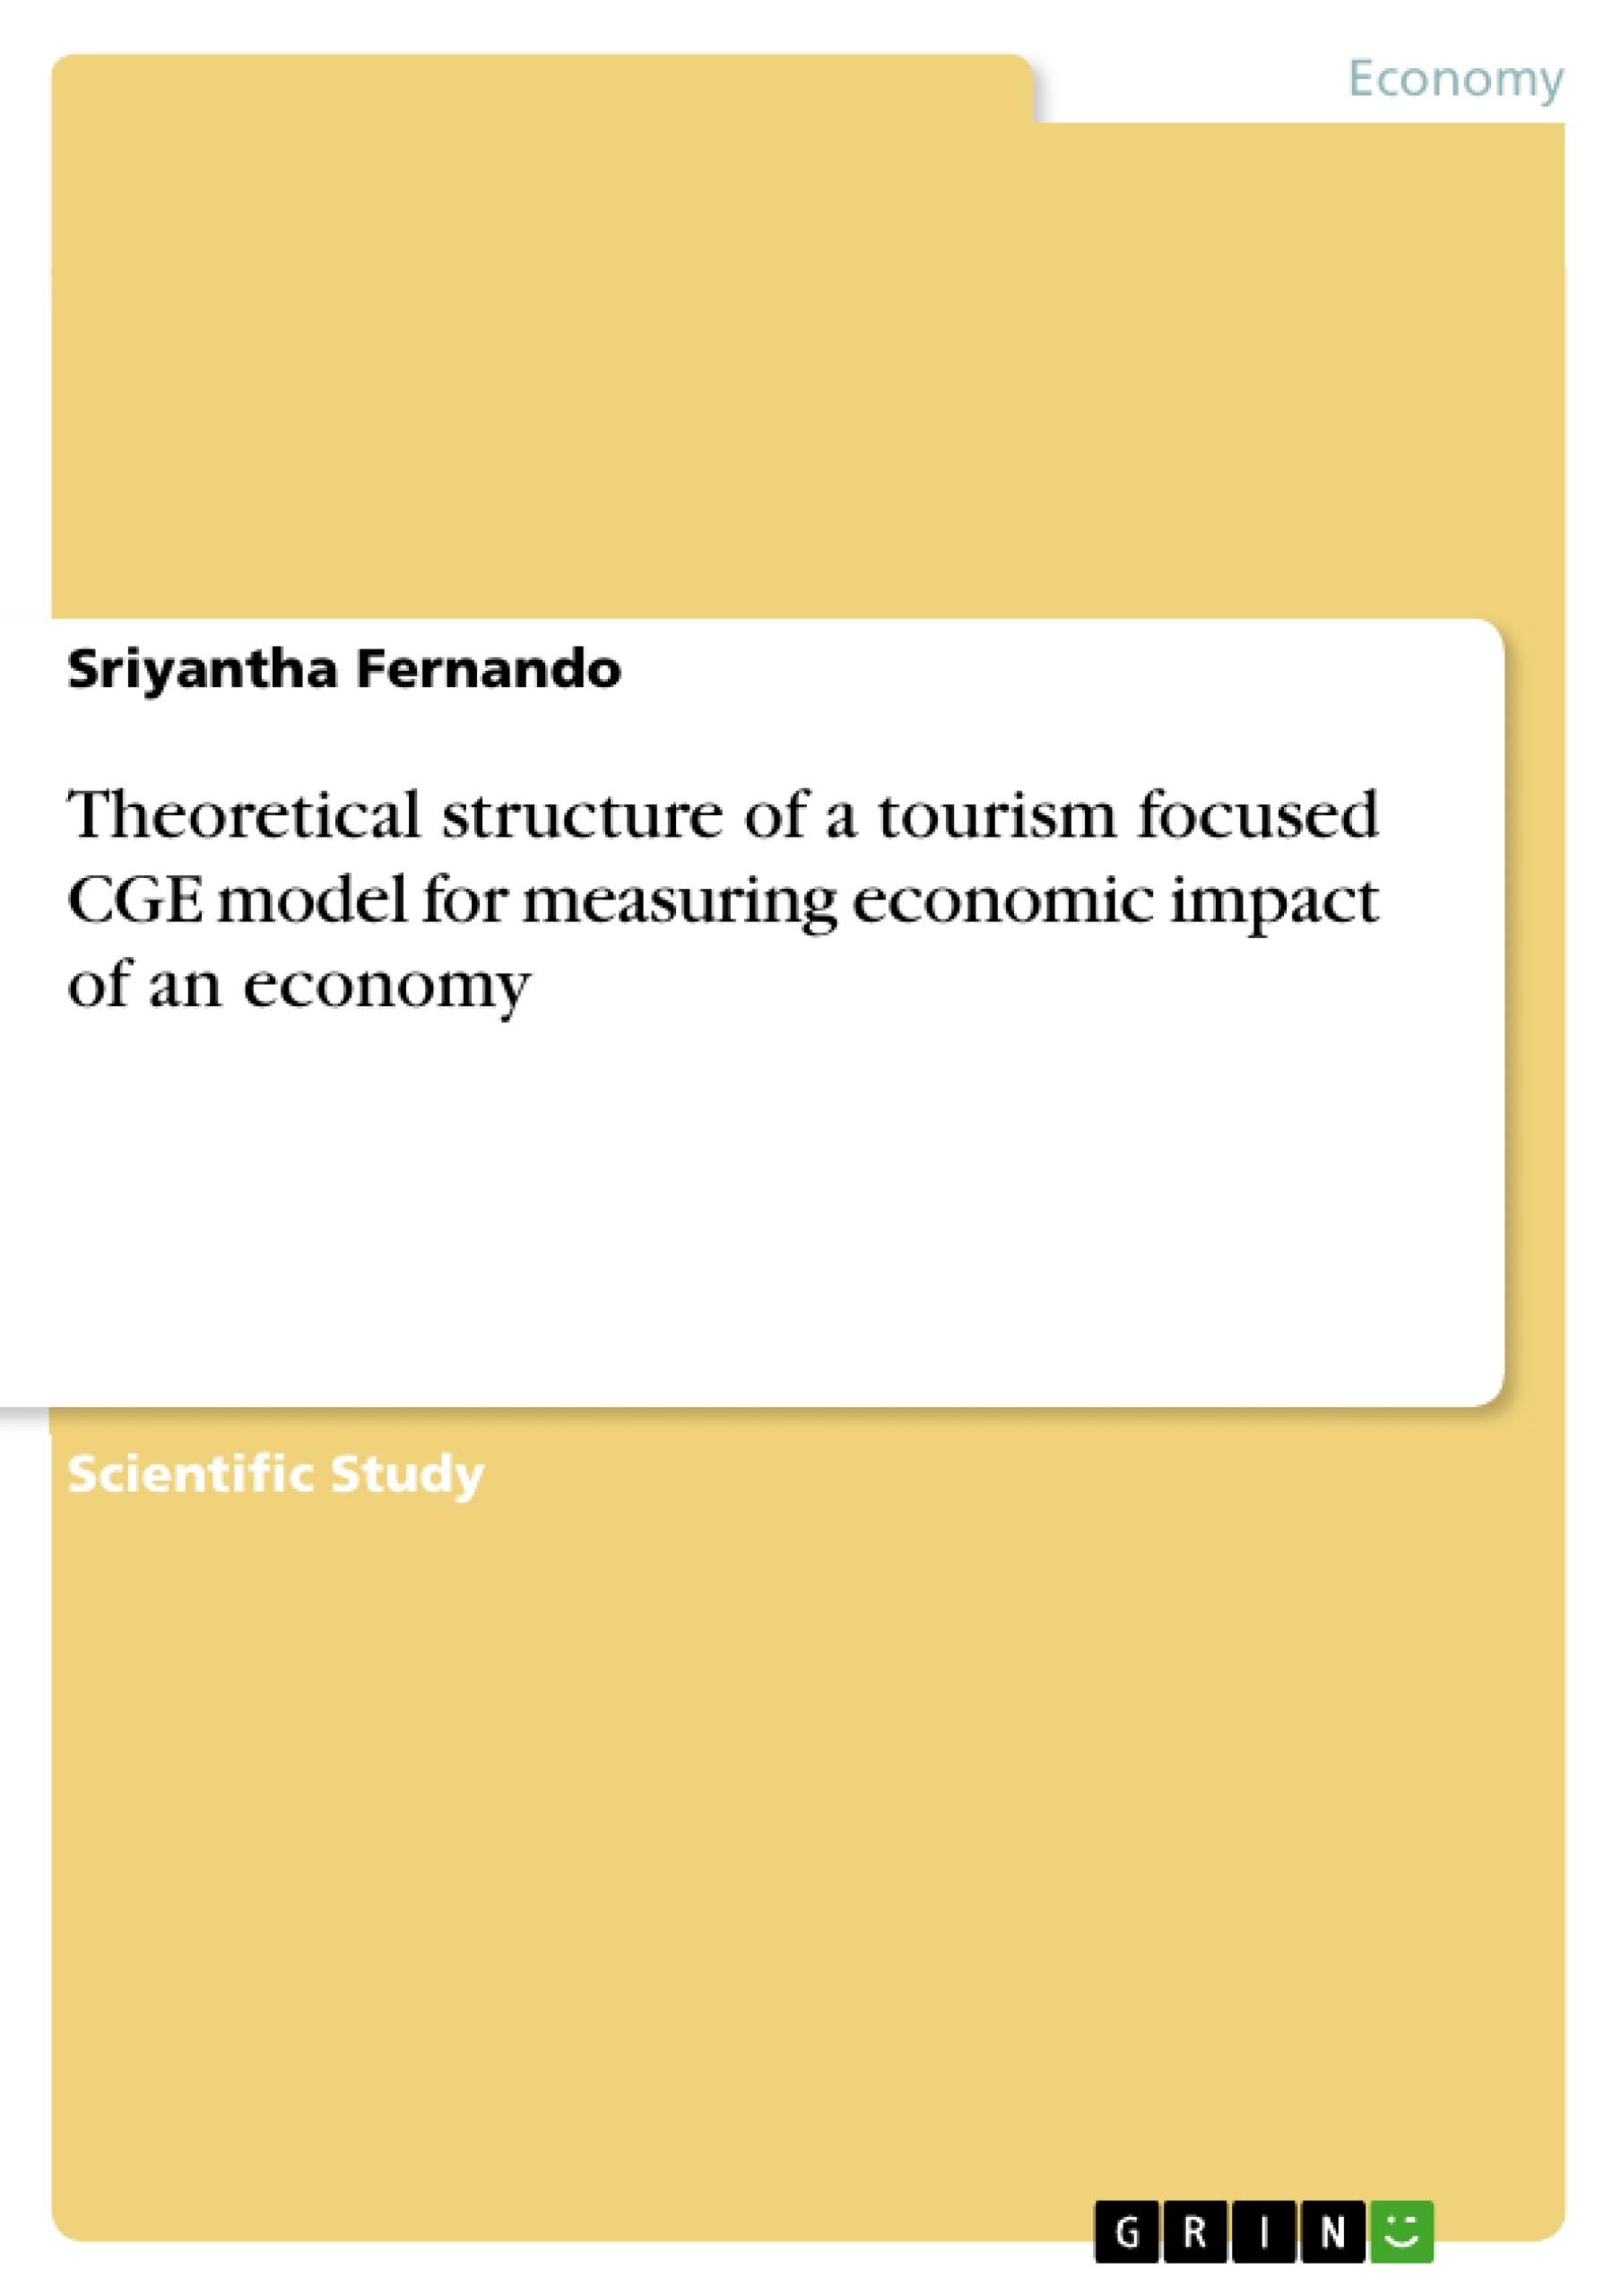 Title: Theoretical structure of a tourism focused CGE model for measuring economic impact of an economy